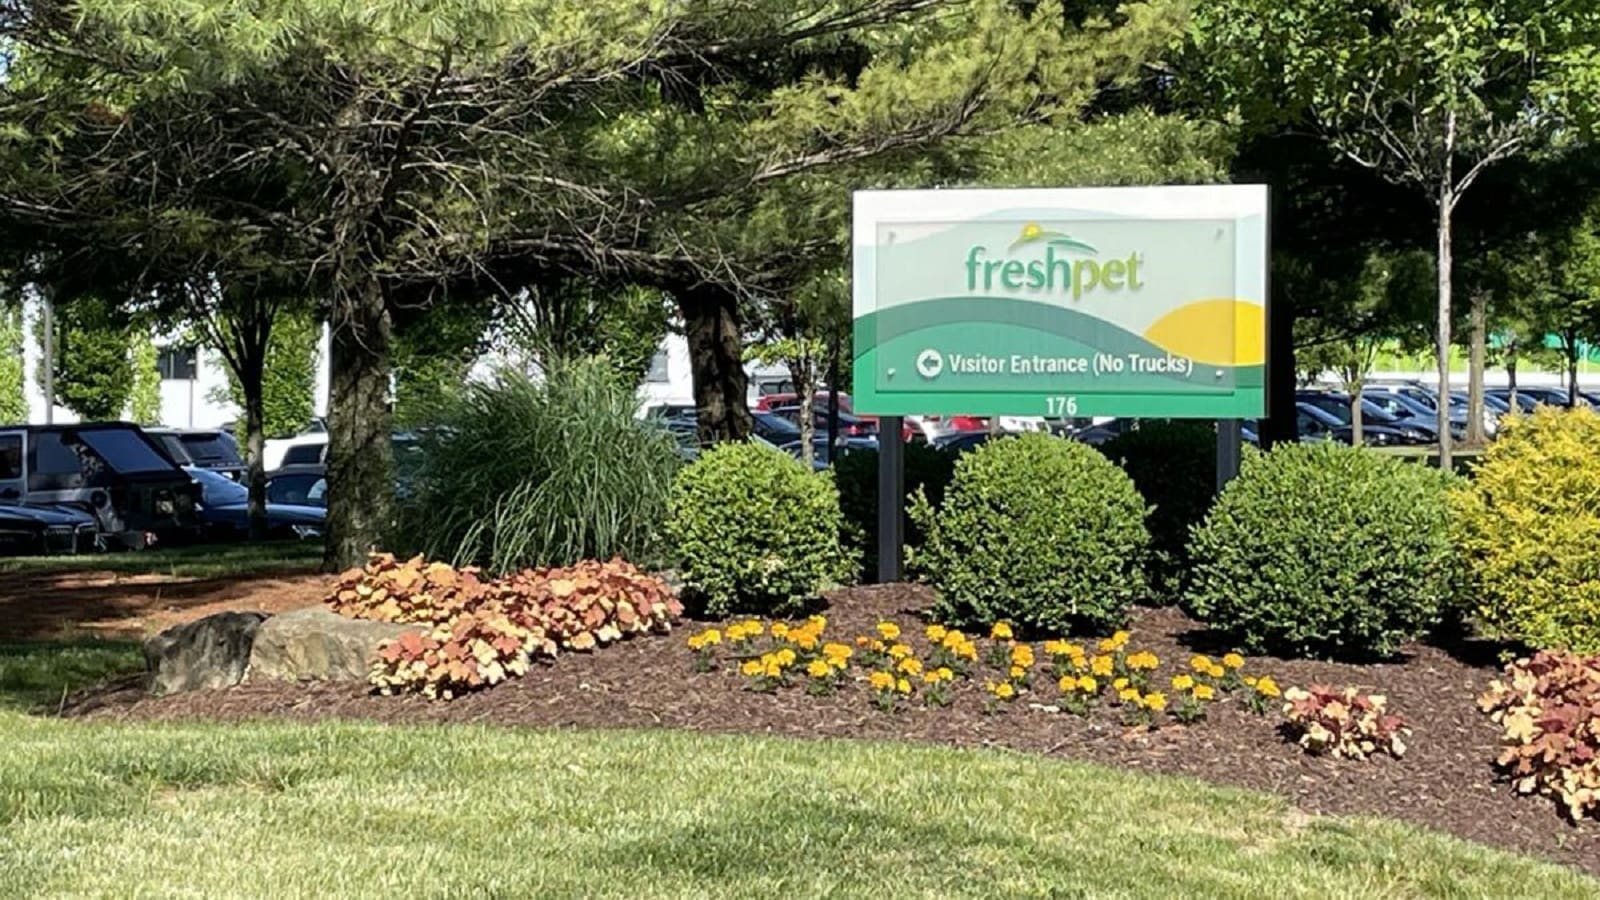 Freshpet signs cooperation agreement to settle investor dispute 